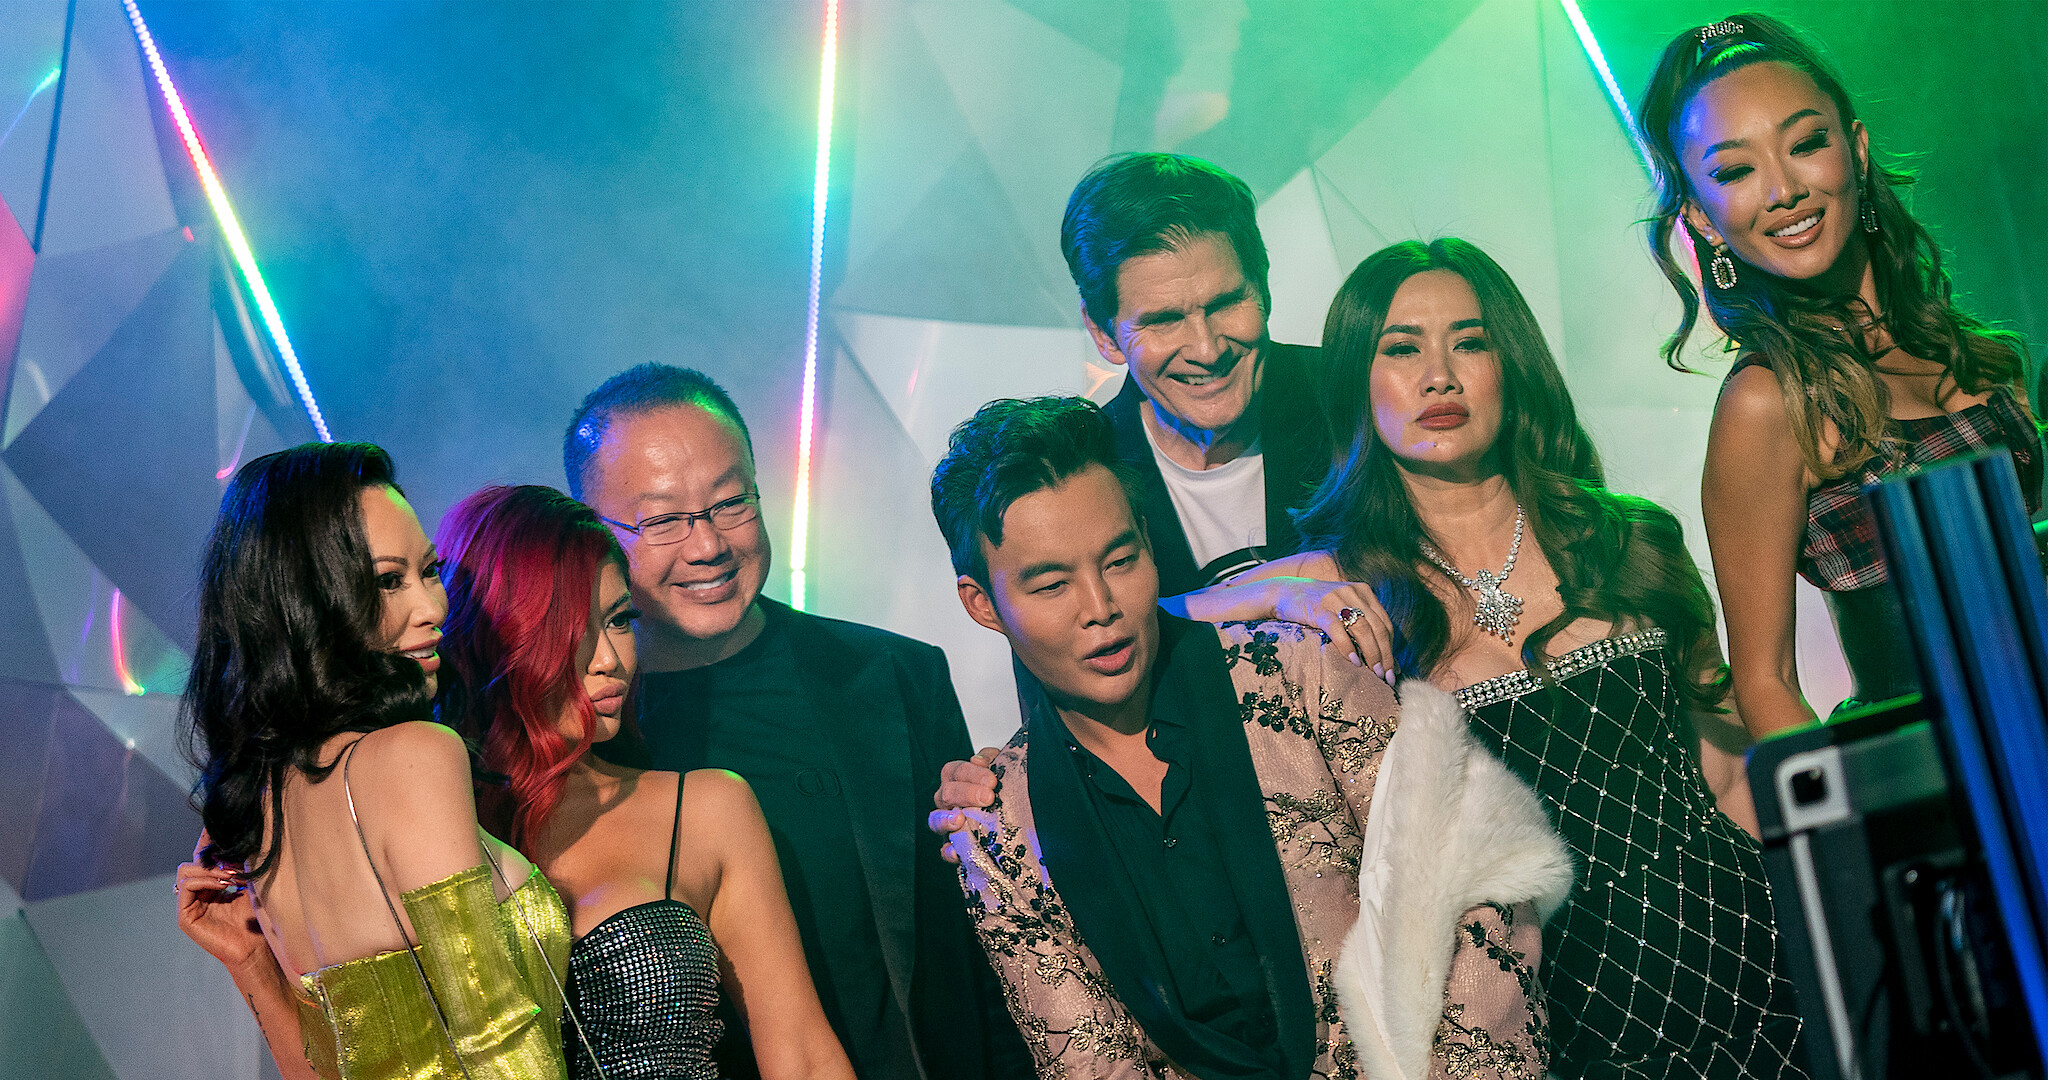 Jaime Xie on season 2 of 'Bling Empire' and her friendship with Anna Shay -  Her World Singapore